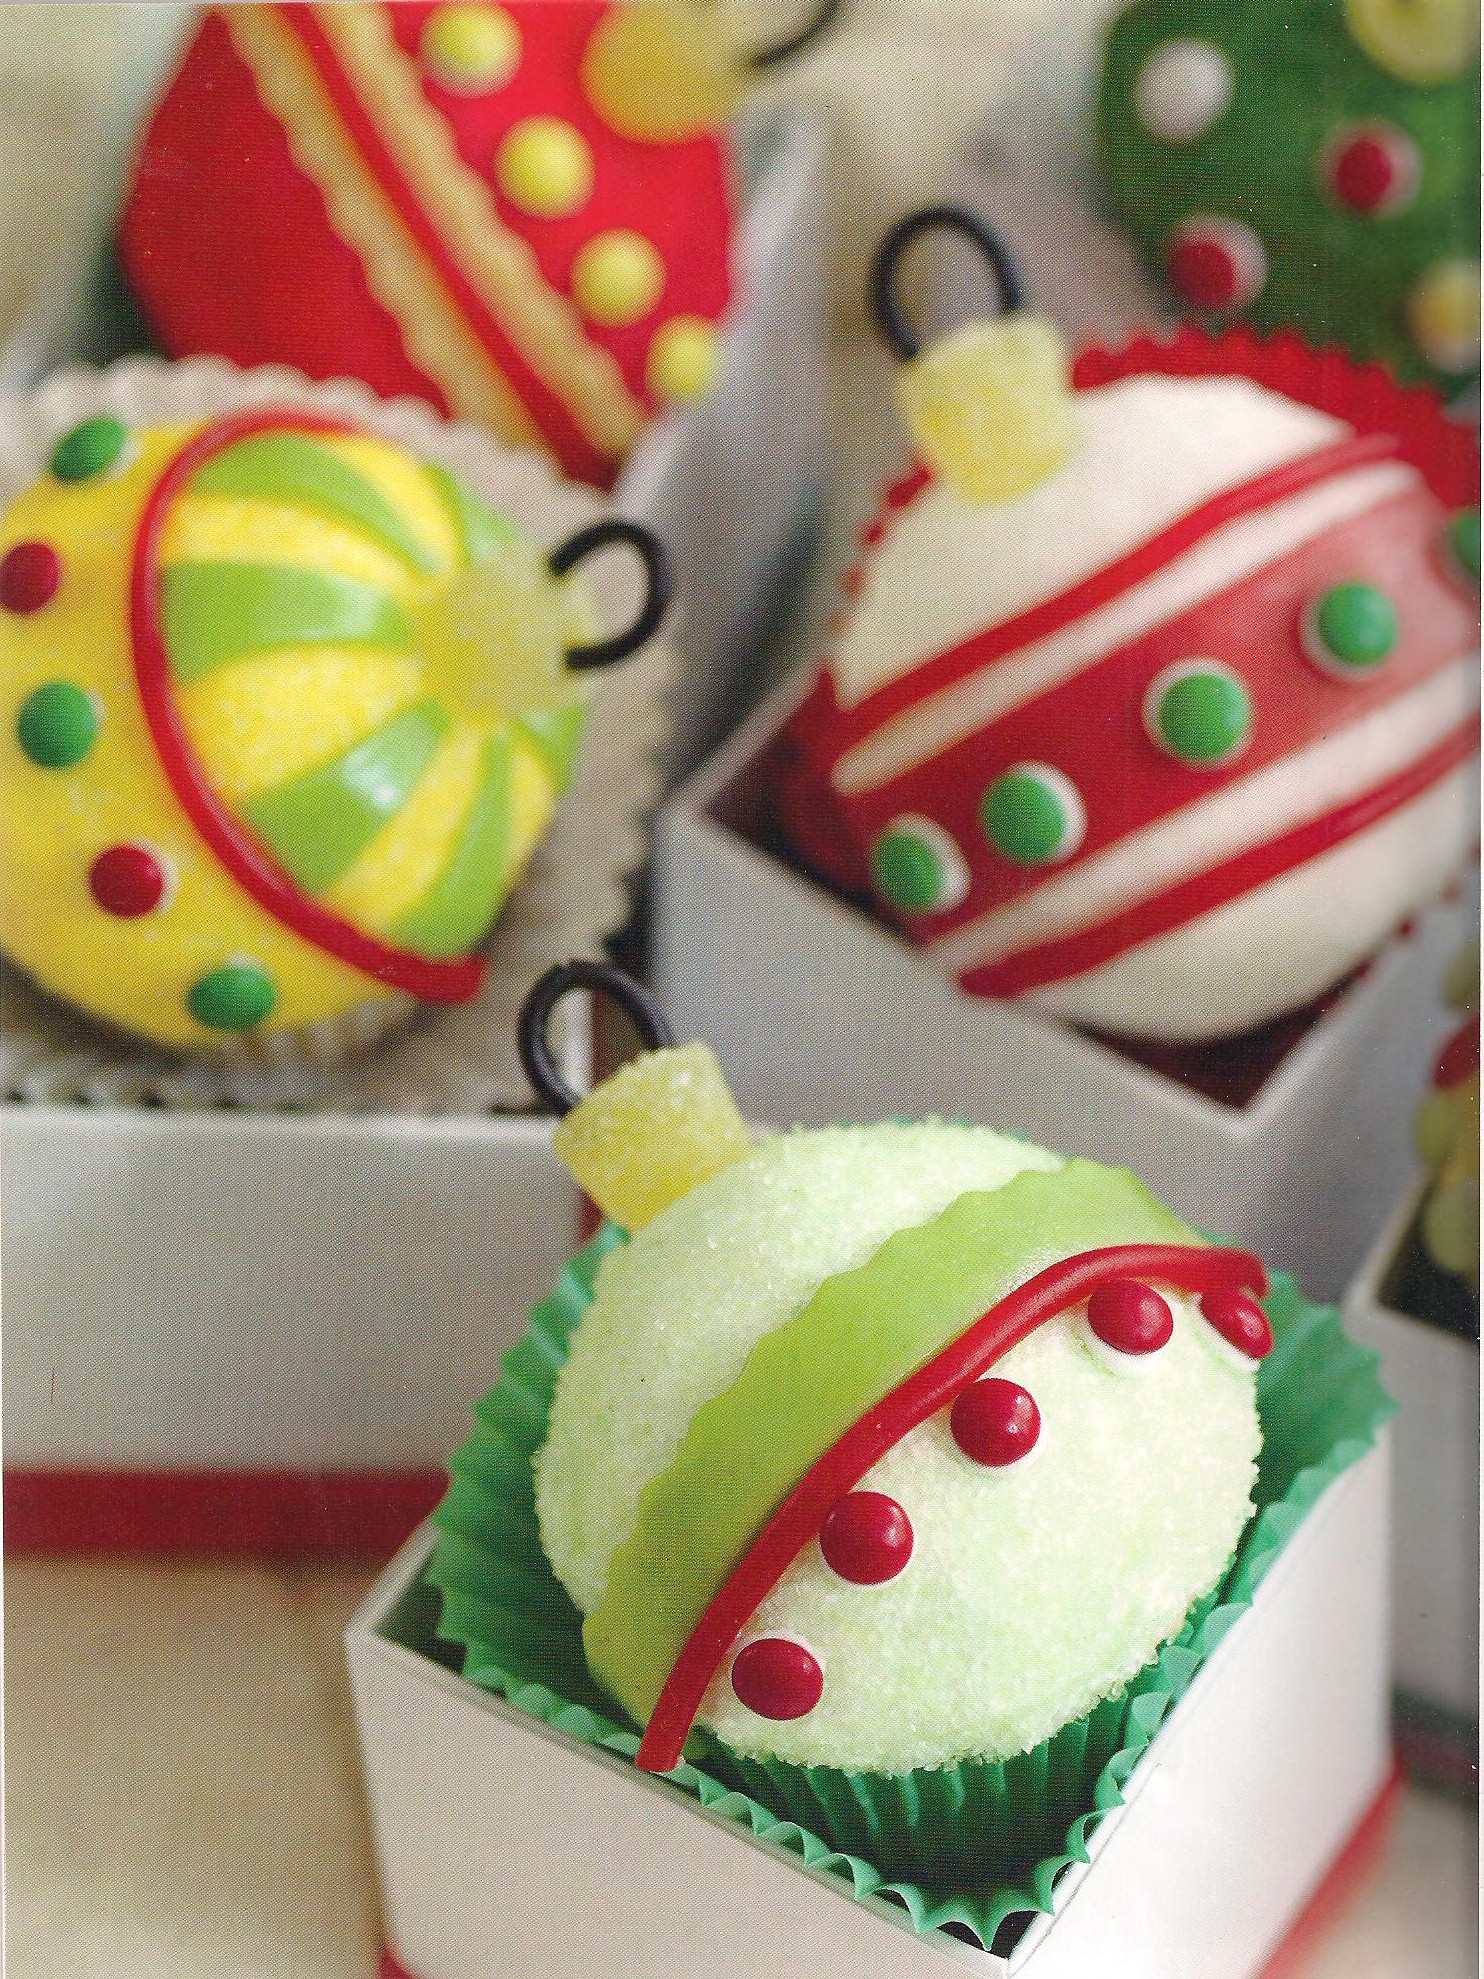 Top Christmas Cupcake Pictures - Best Collections Cake Recipe